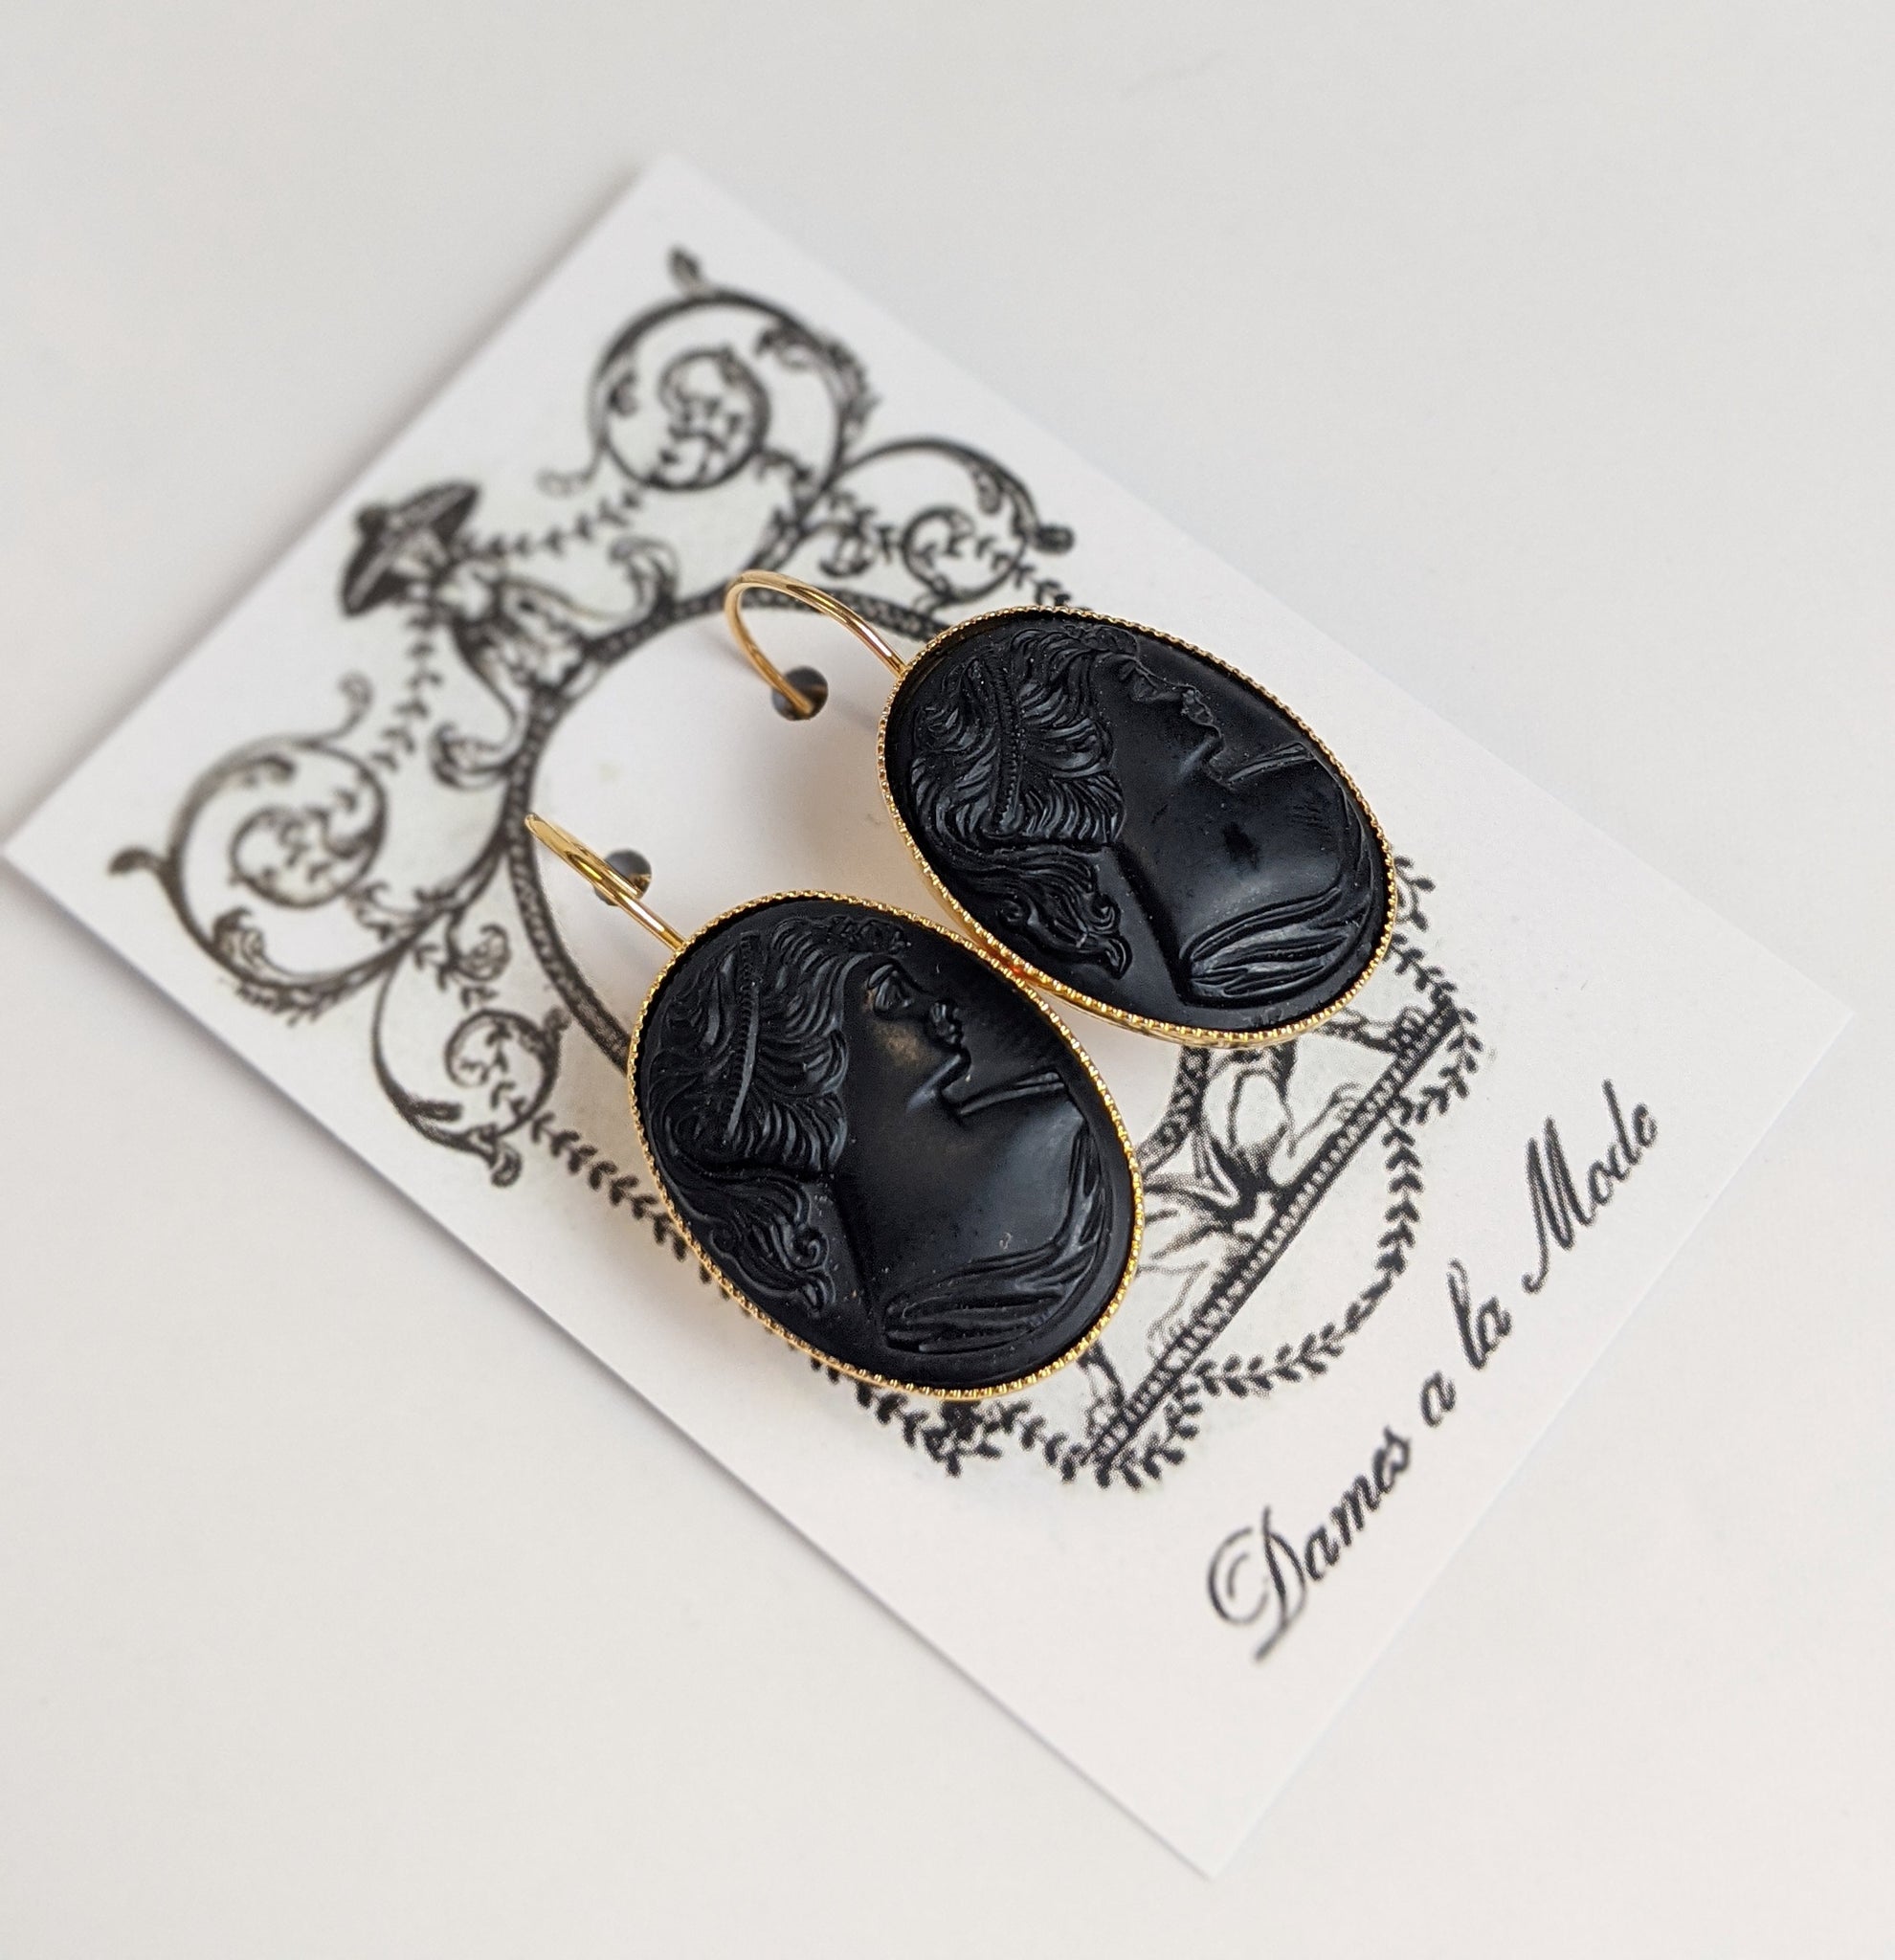 Buy CAMEO STUD EARRINGS, Victorian Style Bridal Earrings, Black White Cameo  Earrings, Gift for Wife, Jewelry, Vintage Cameo Earrings Online in India -  Etsy